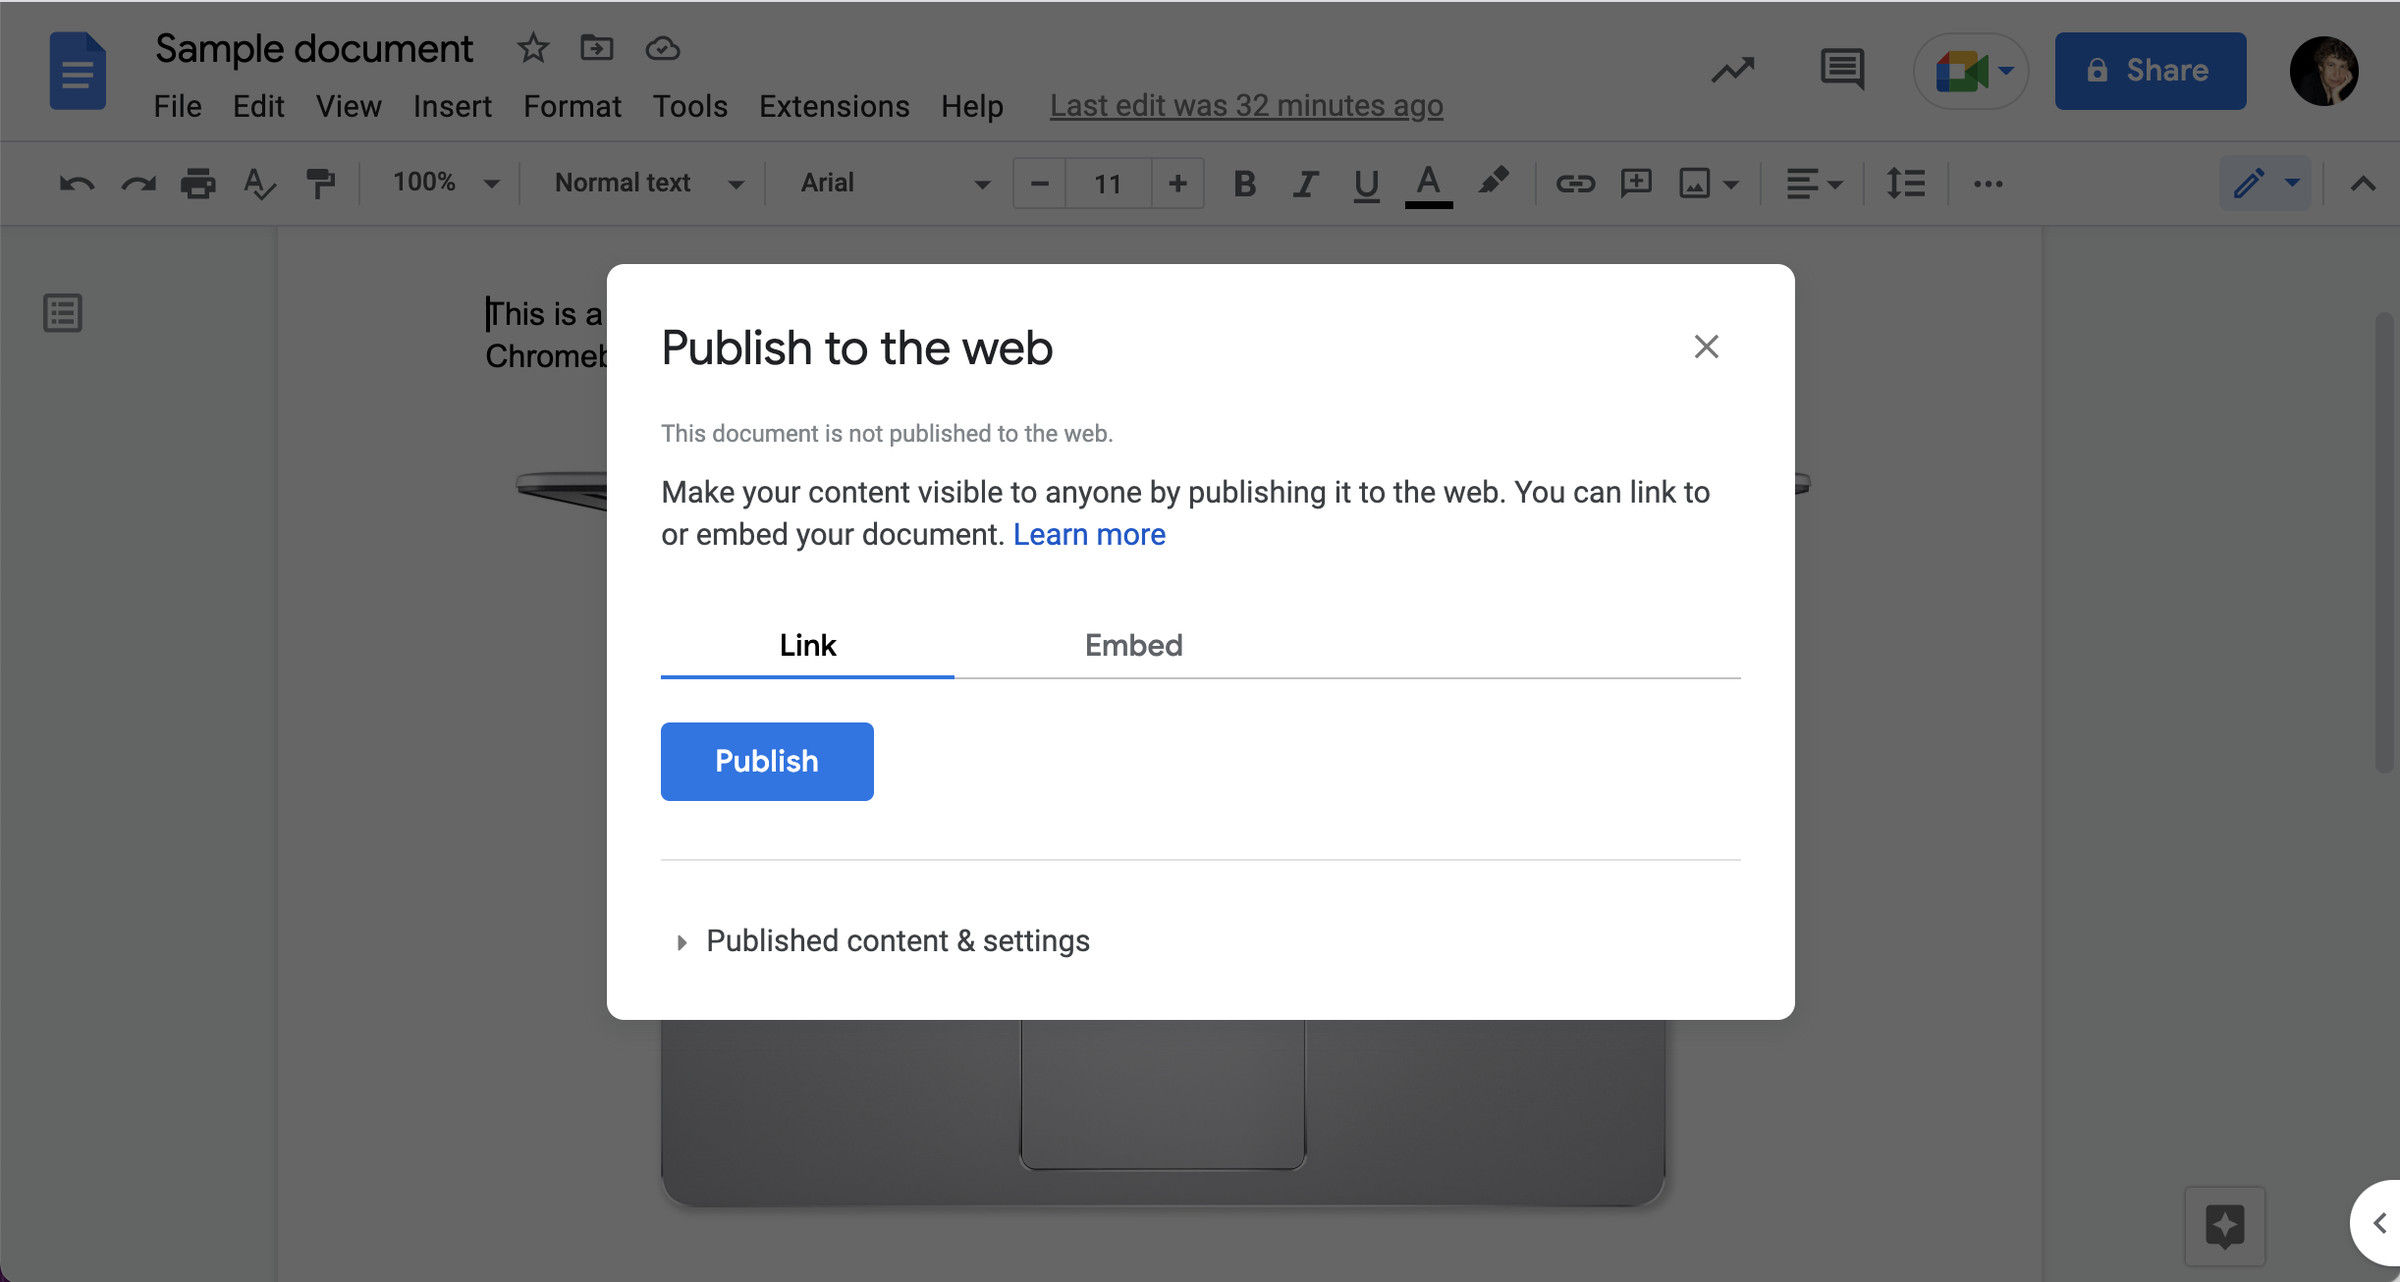 Pop up that offers a link to a web page of your document